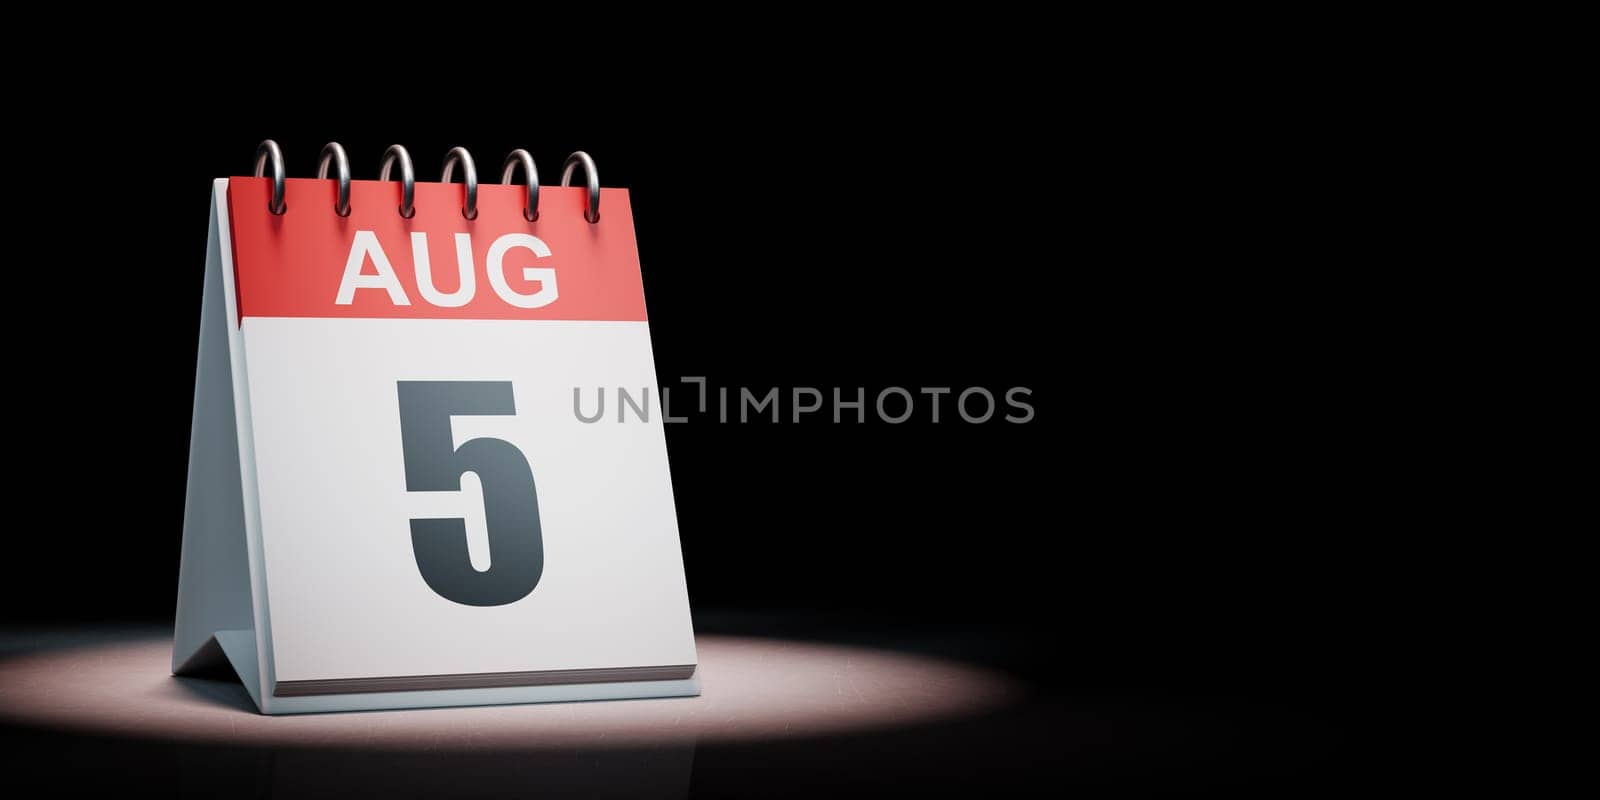 Red and White August 5 Desk Calendar Spotlighted on Black Background with Copy Space 3D Illustration